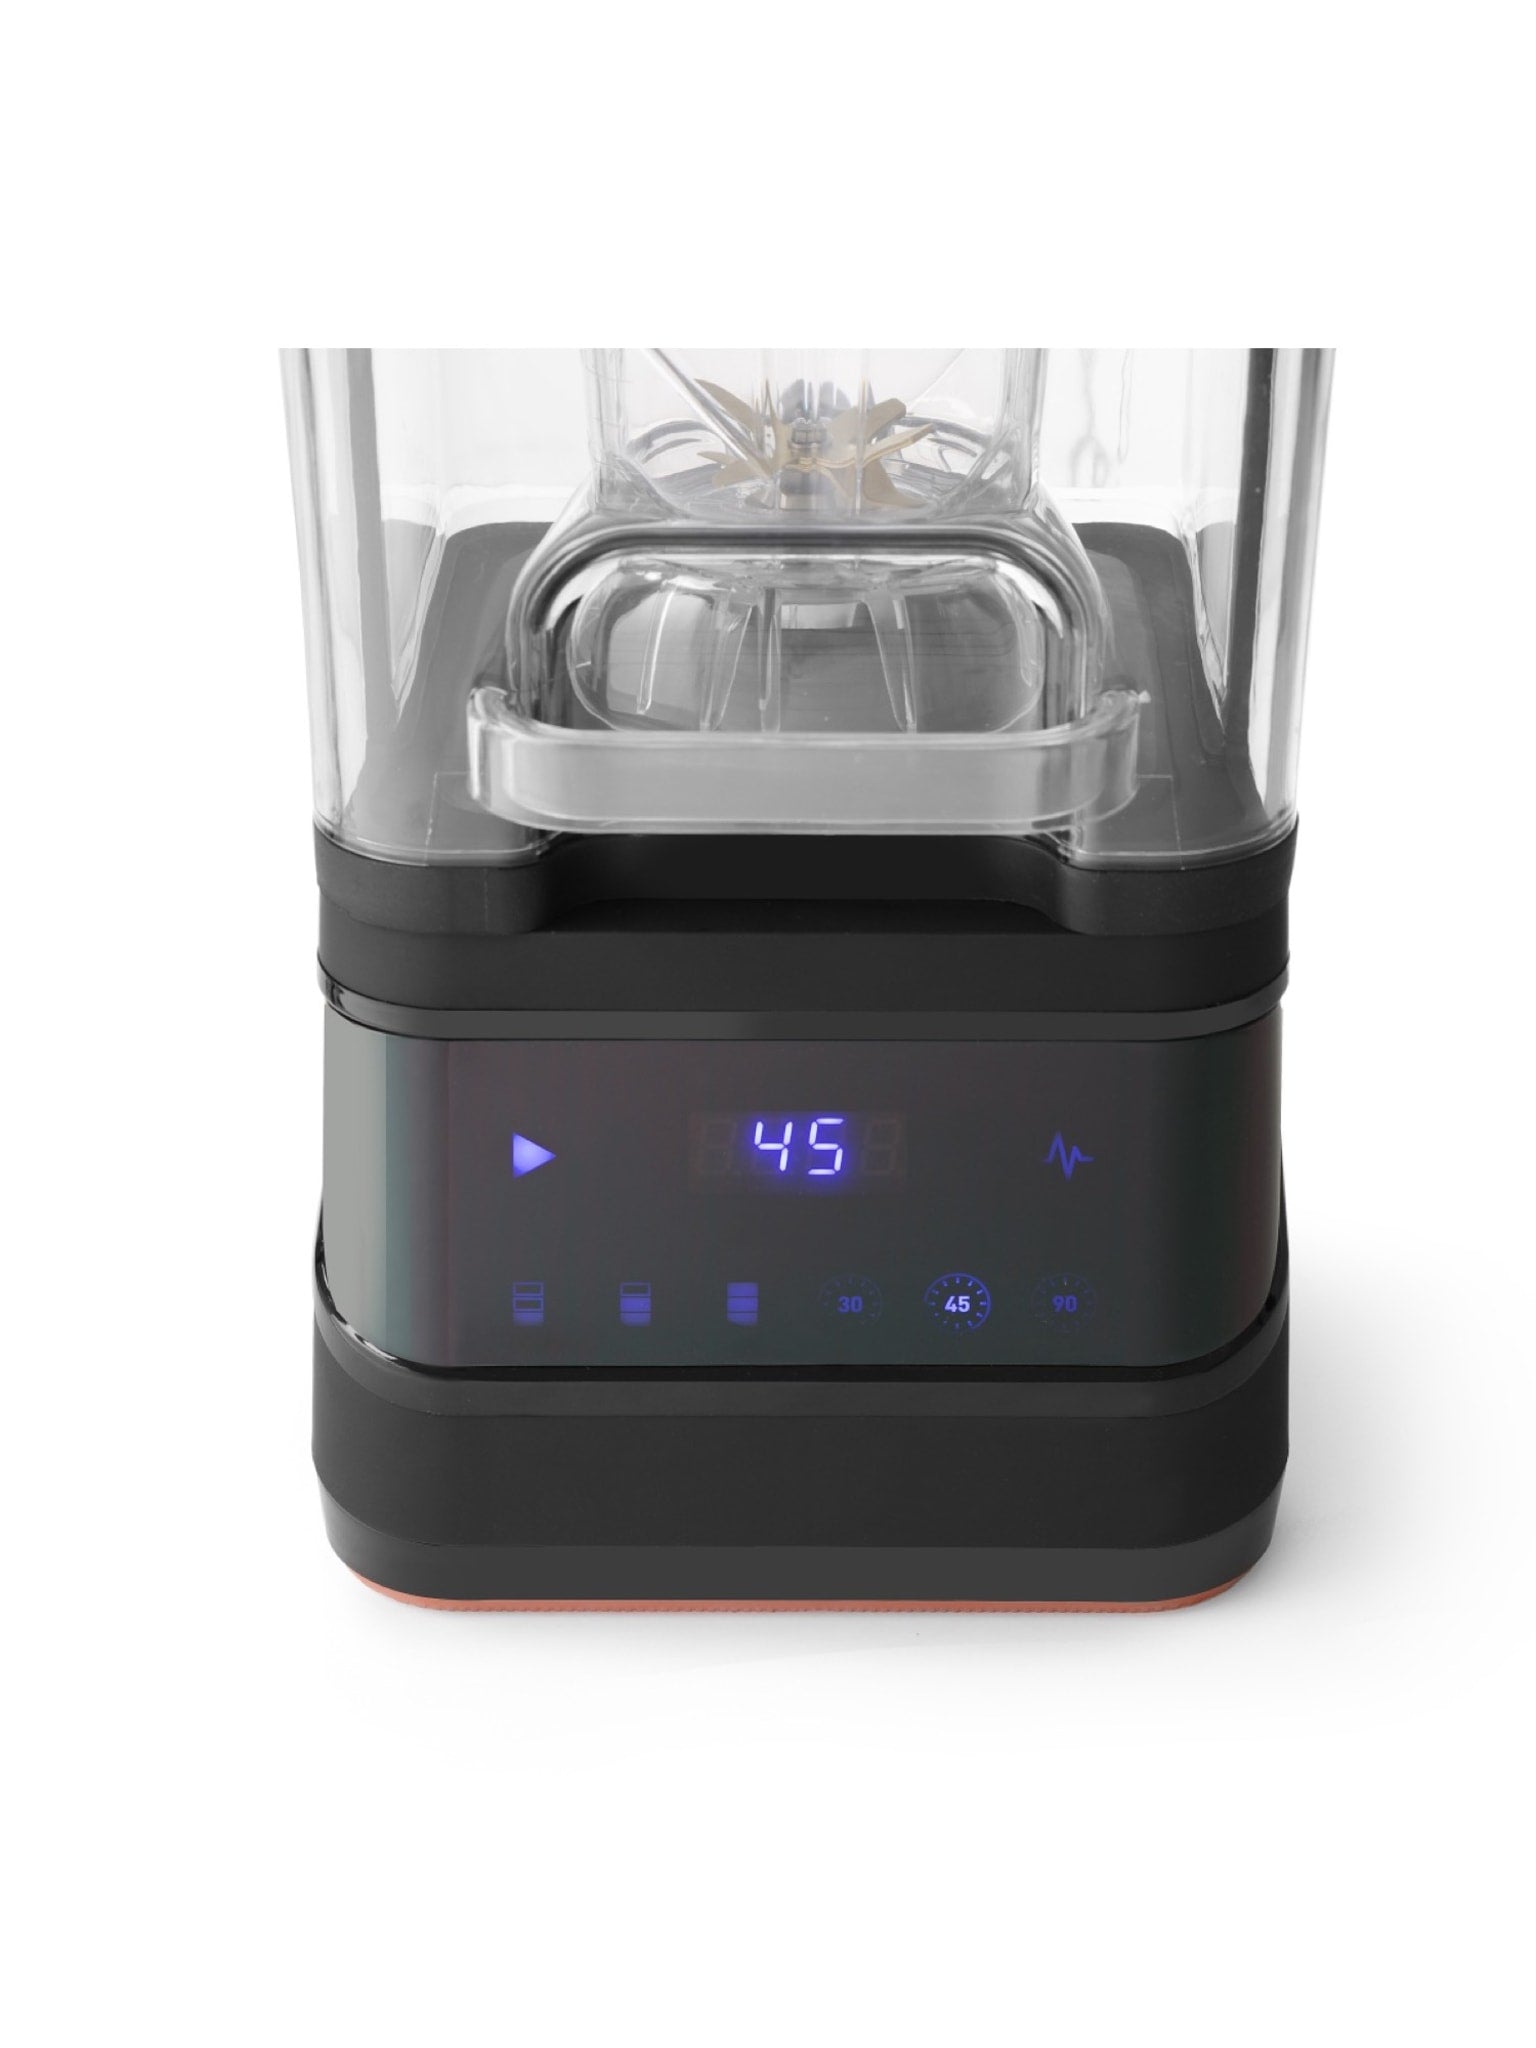 Let this advanced blender with digital display be your ultimate tool in the bar.